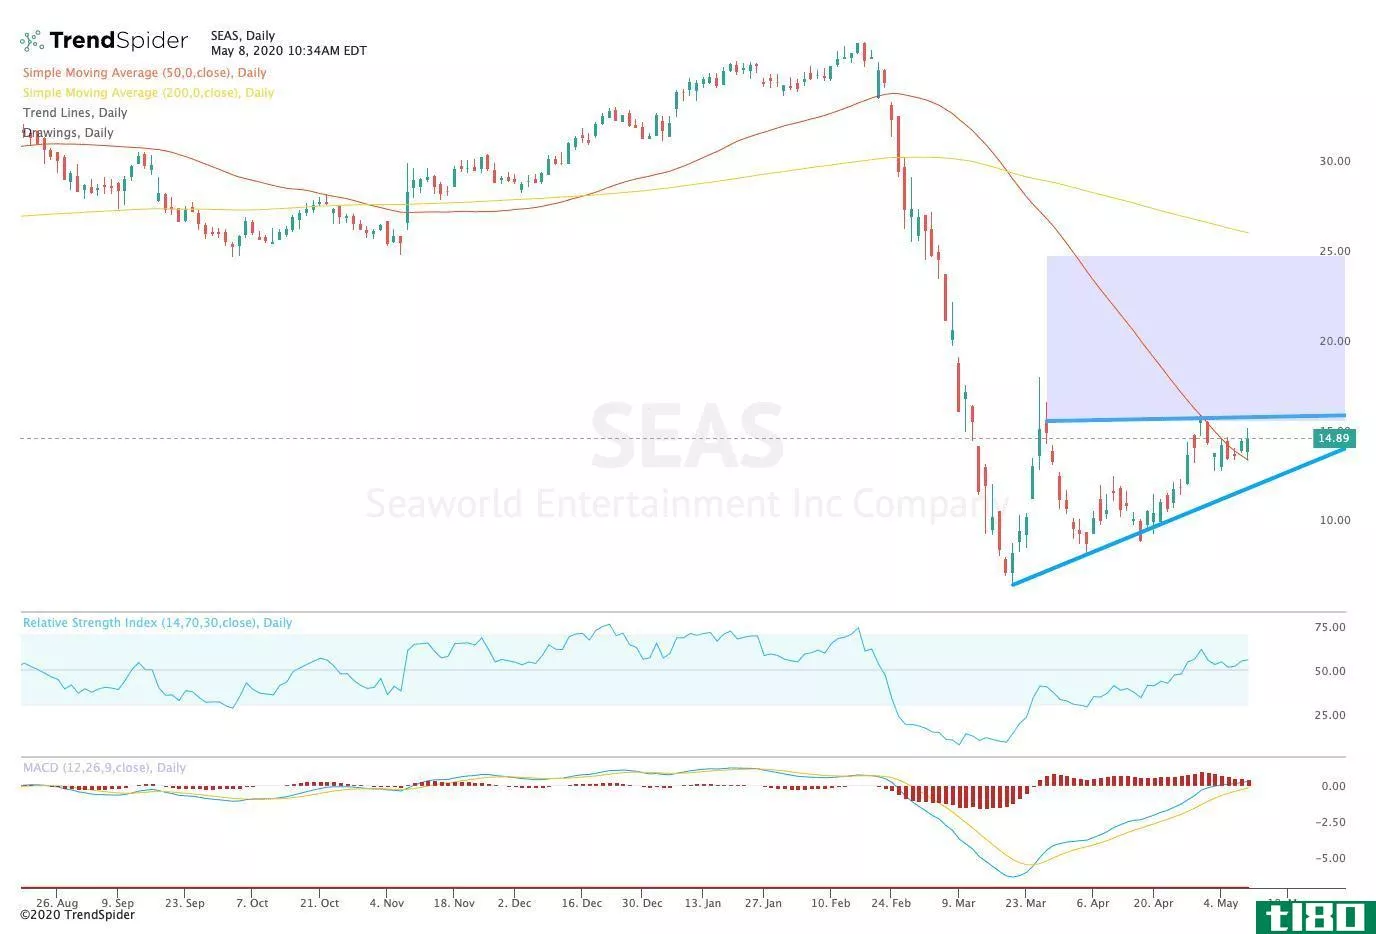 Chart showing the share price performance of SeaWorld Entertainment, Inc. (SEAS)